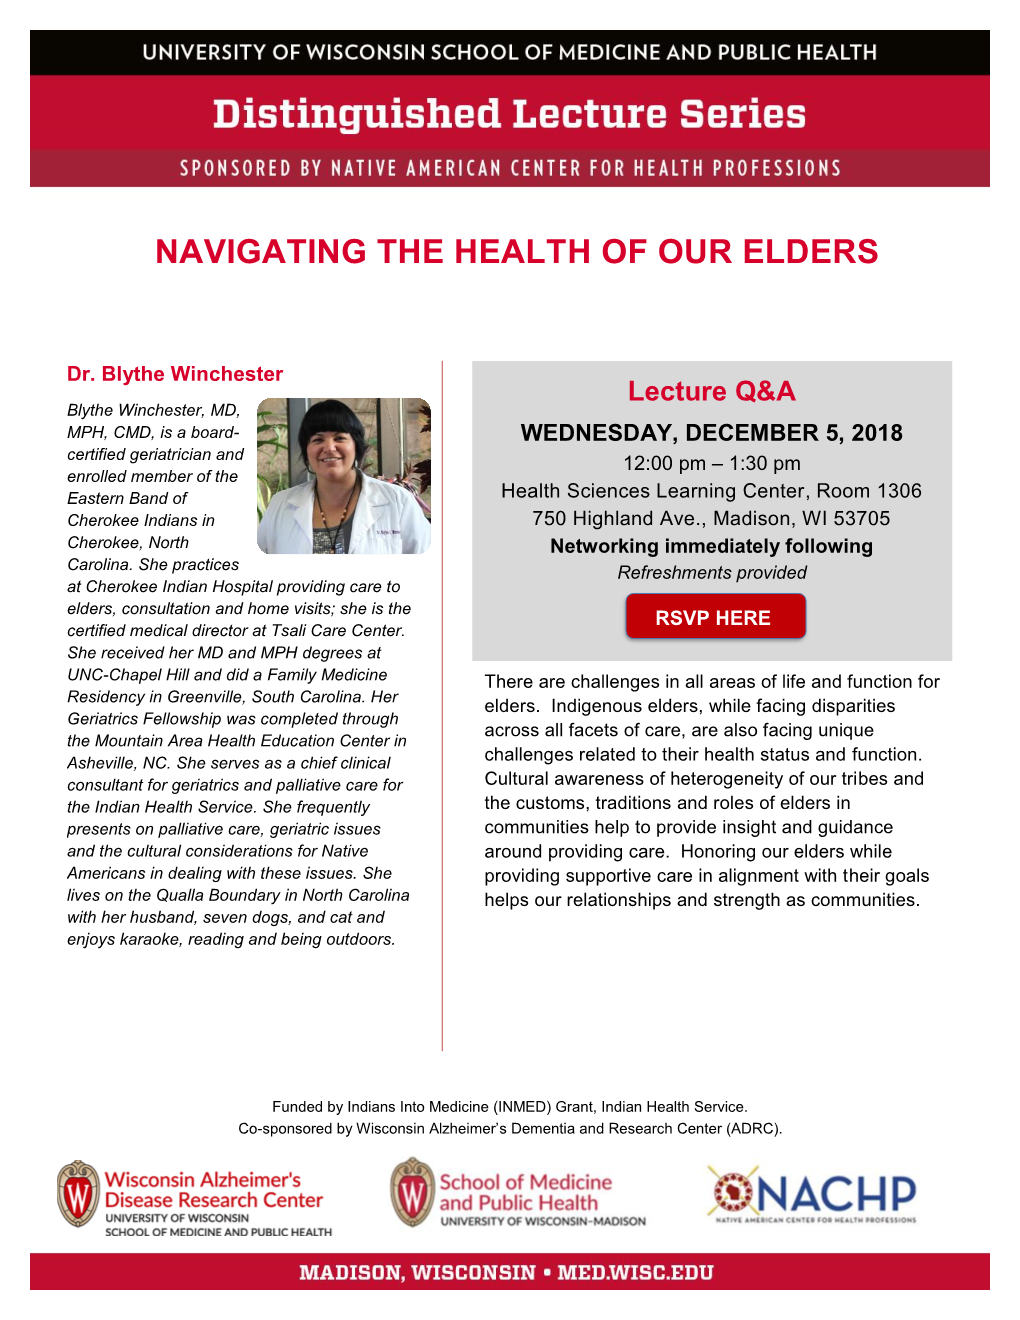 Navigating the Health of Our Elders